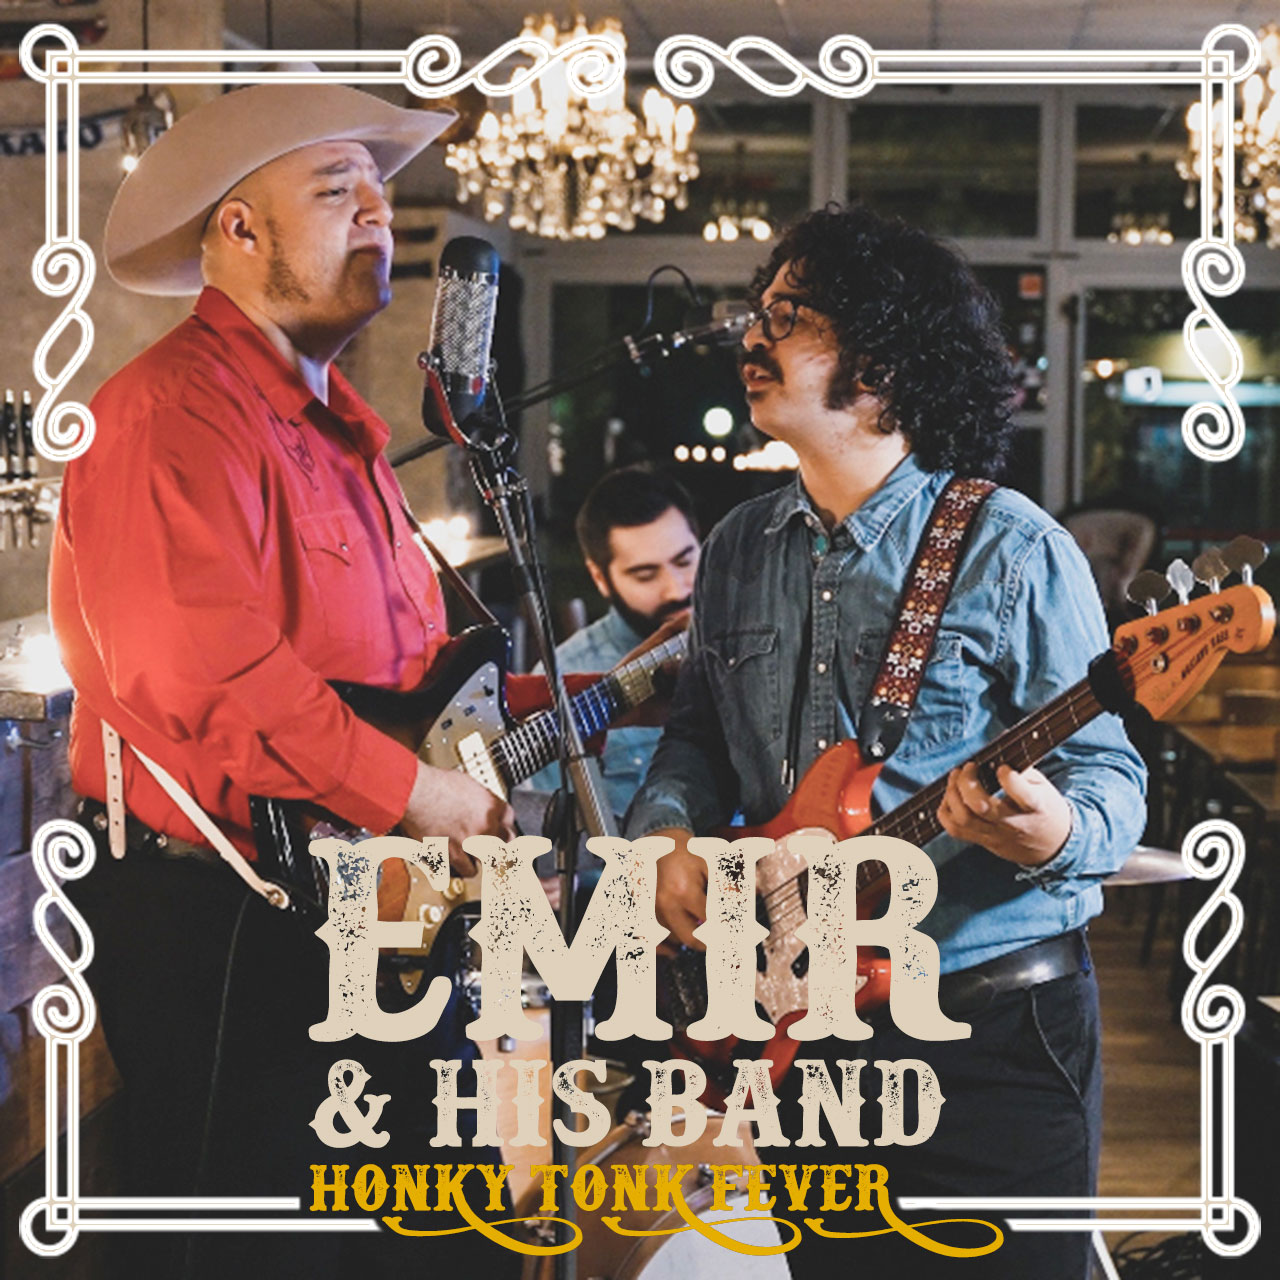 EMIR & HIS BAND, DALL’ALBUM ‘ELECTRIC HONKY TONK’ IL VIDEOCLIP DI ‘HONKY TONK FEVER’